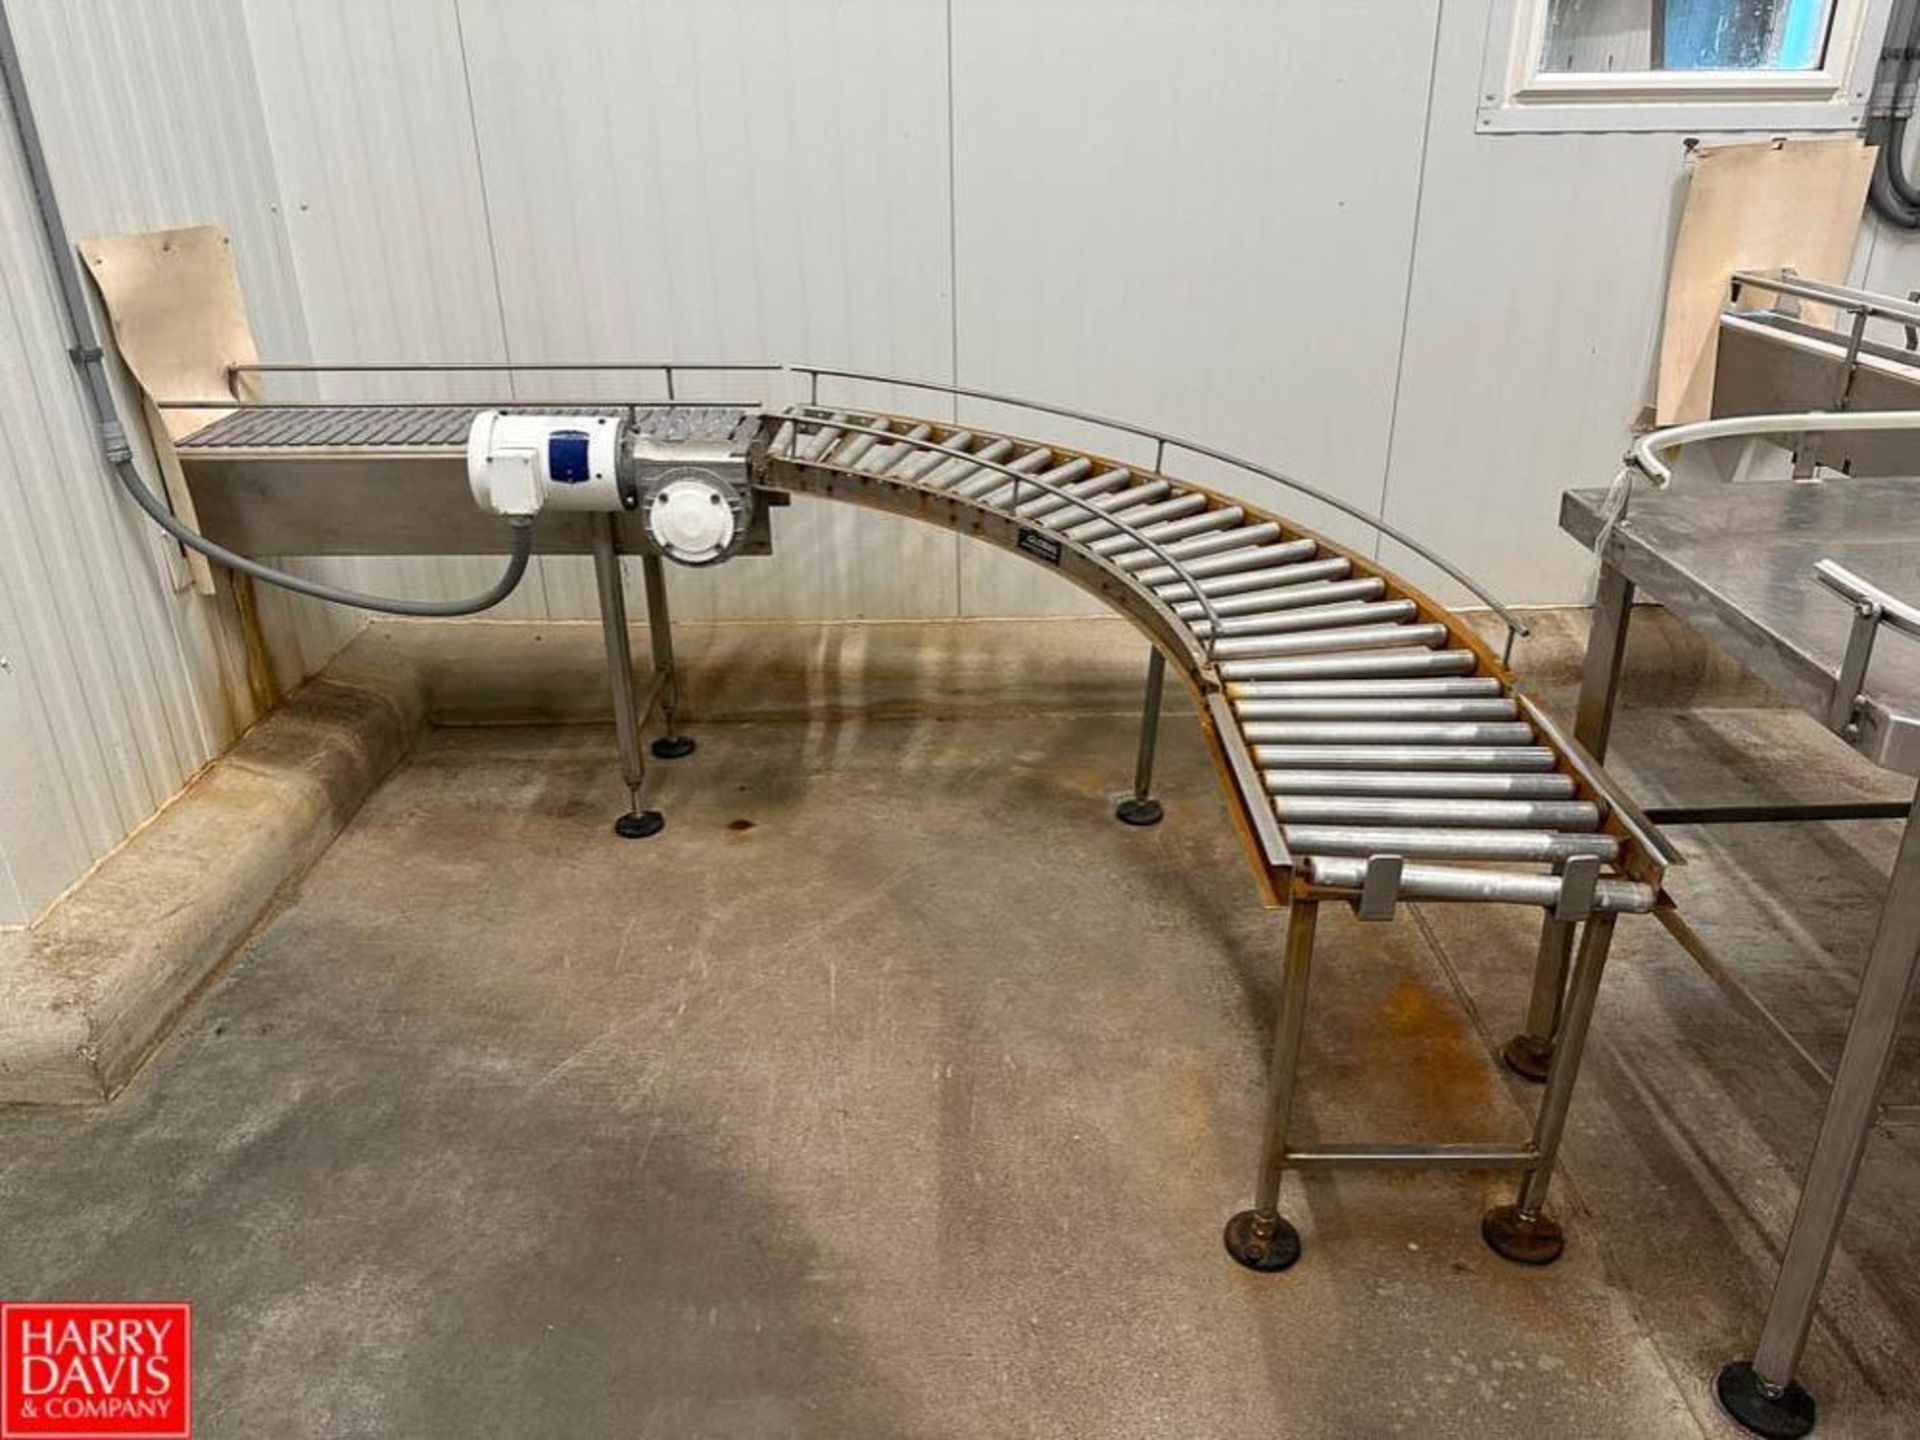 13’ x 1’ S/S Framed Power Conveyor with 6’ x 16” Gravity Fed Roller Conveyor - Rigging Fee: $300 - Image 2 of 2